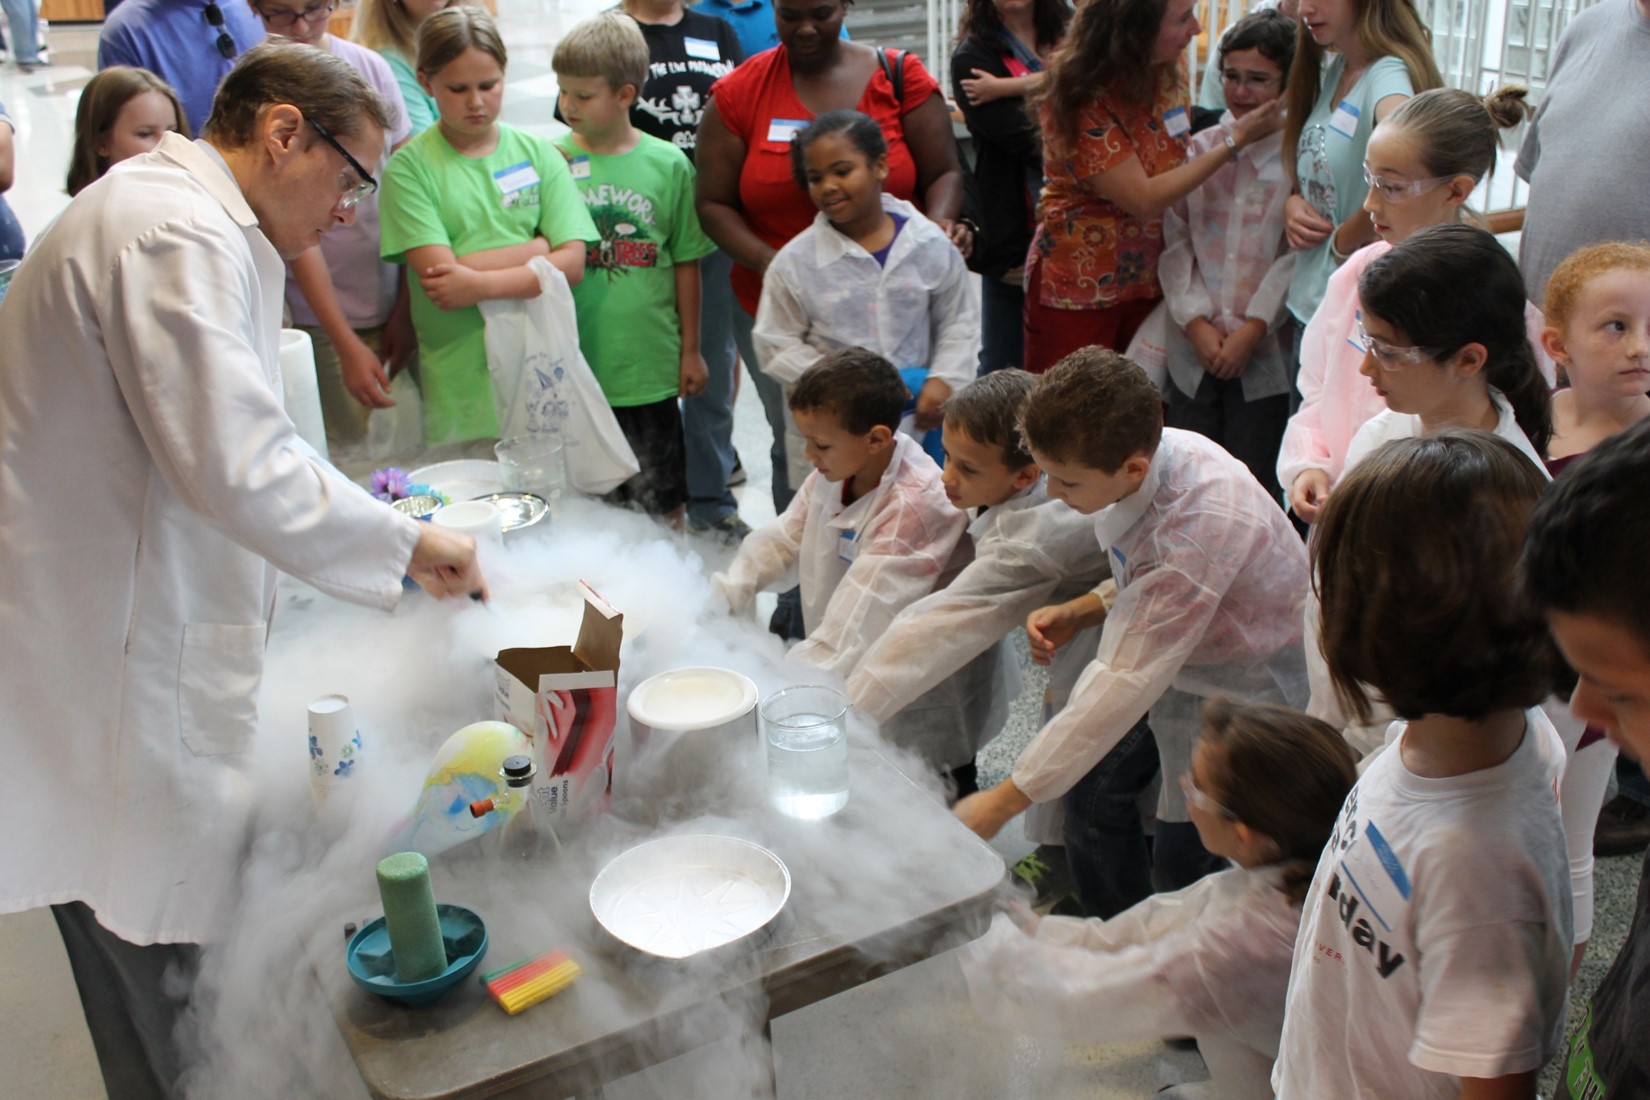 Science Saturday with the chemistry department.